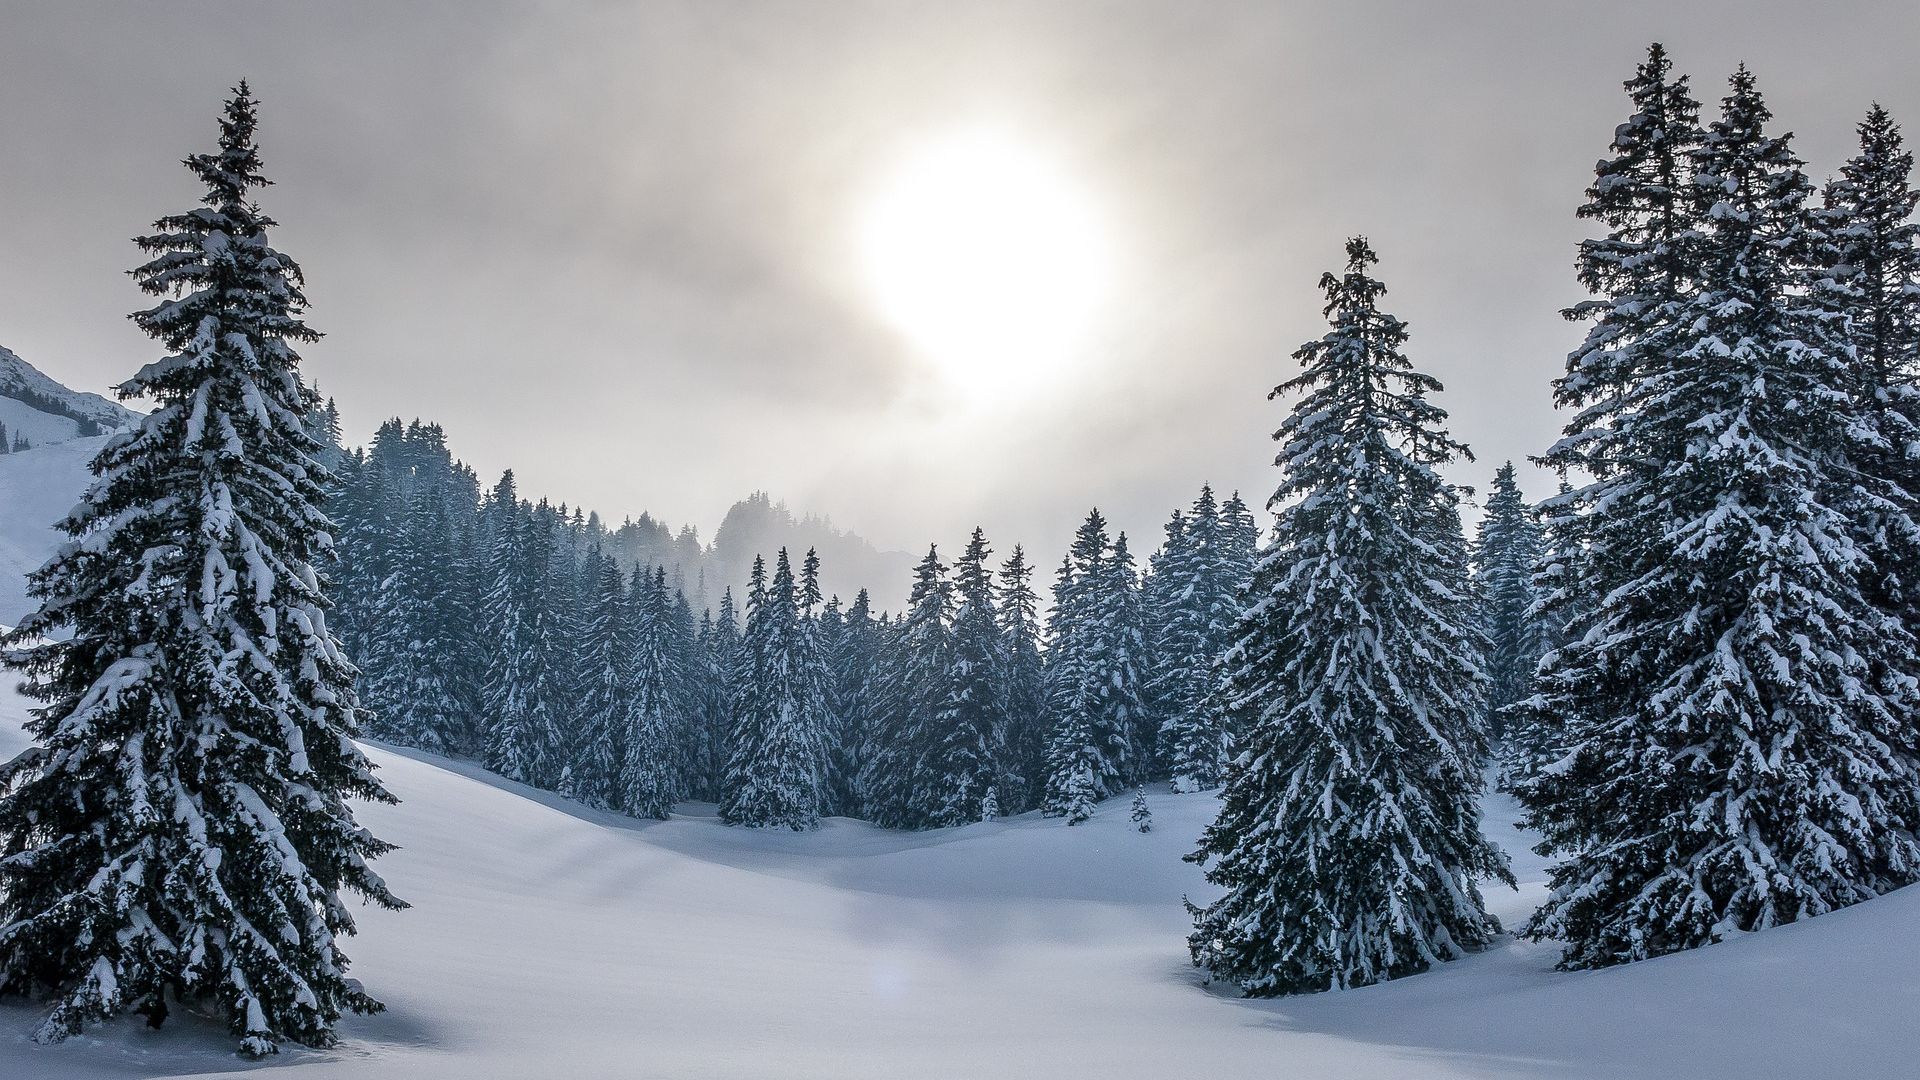 10 Facts About the Winter Solstice, the Shortest Day of the Year